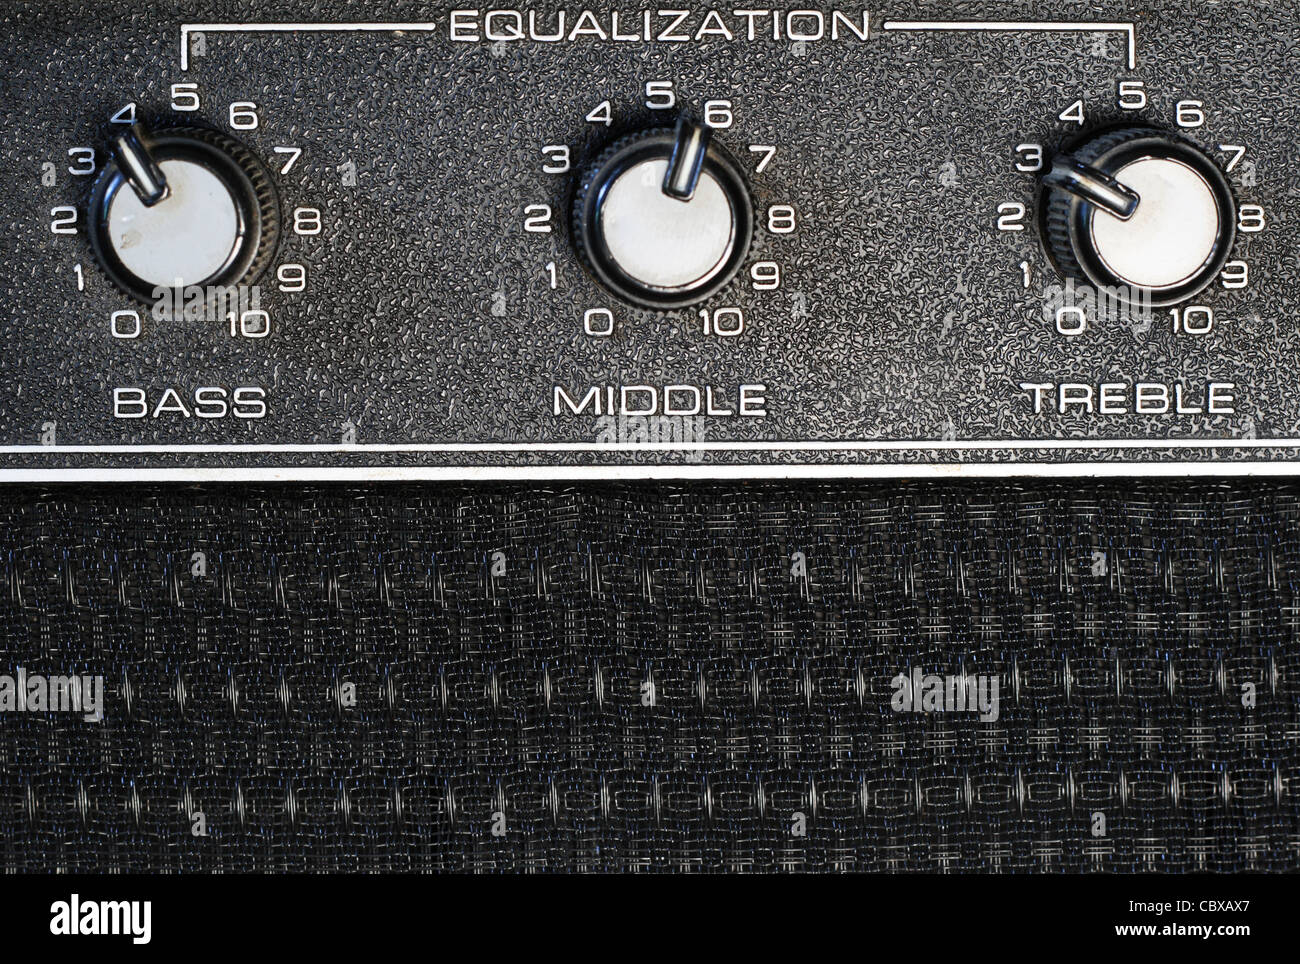 bass, middle, and treble equalization knobs on an amplifier Stock Photo